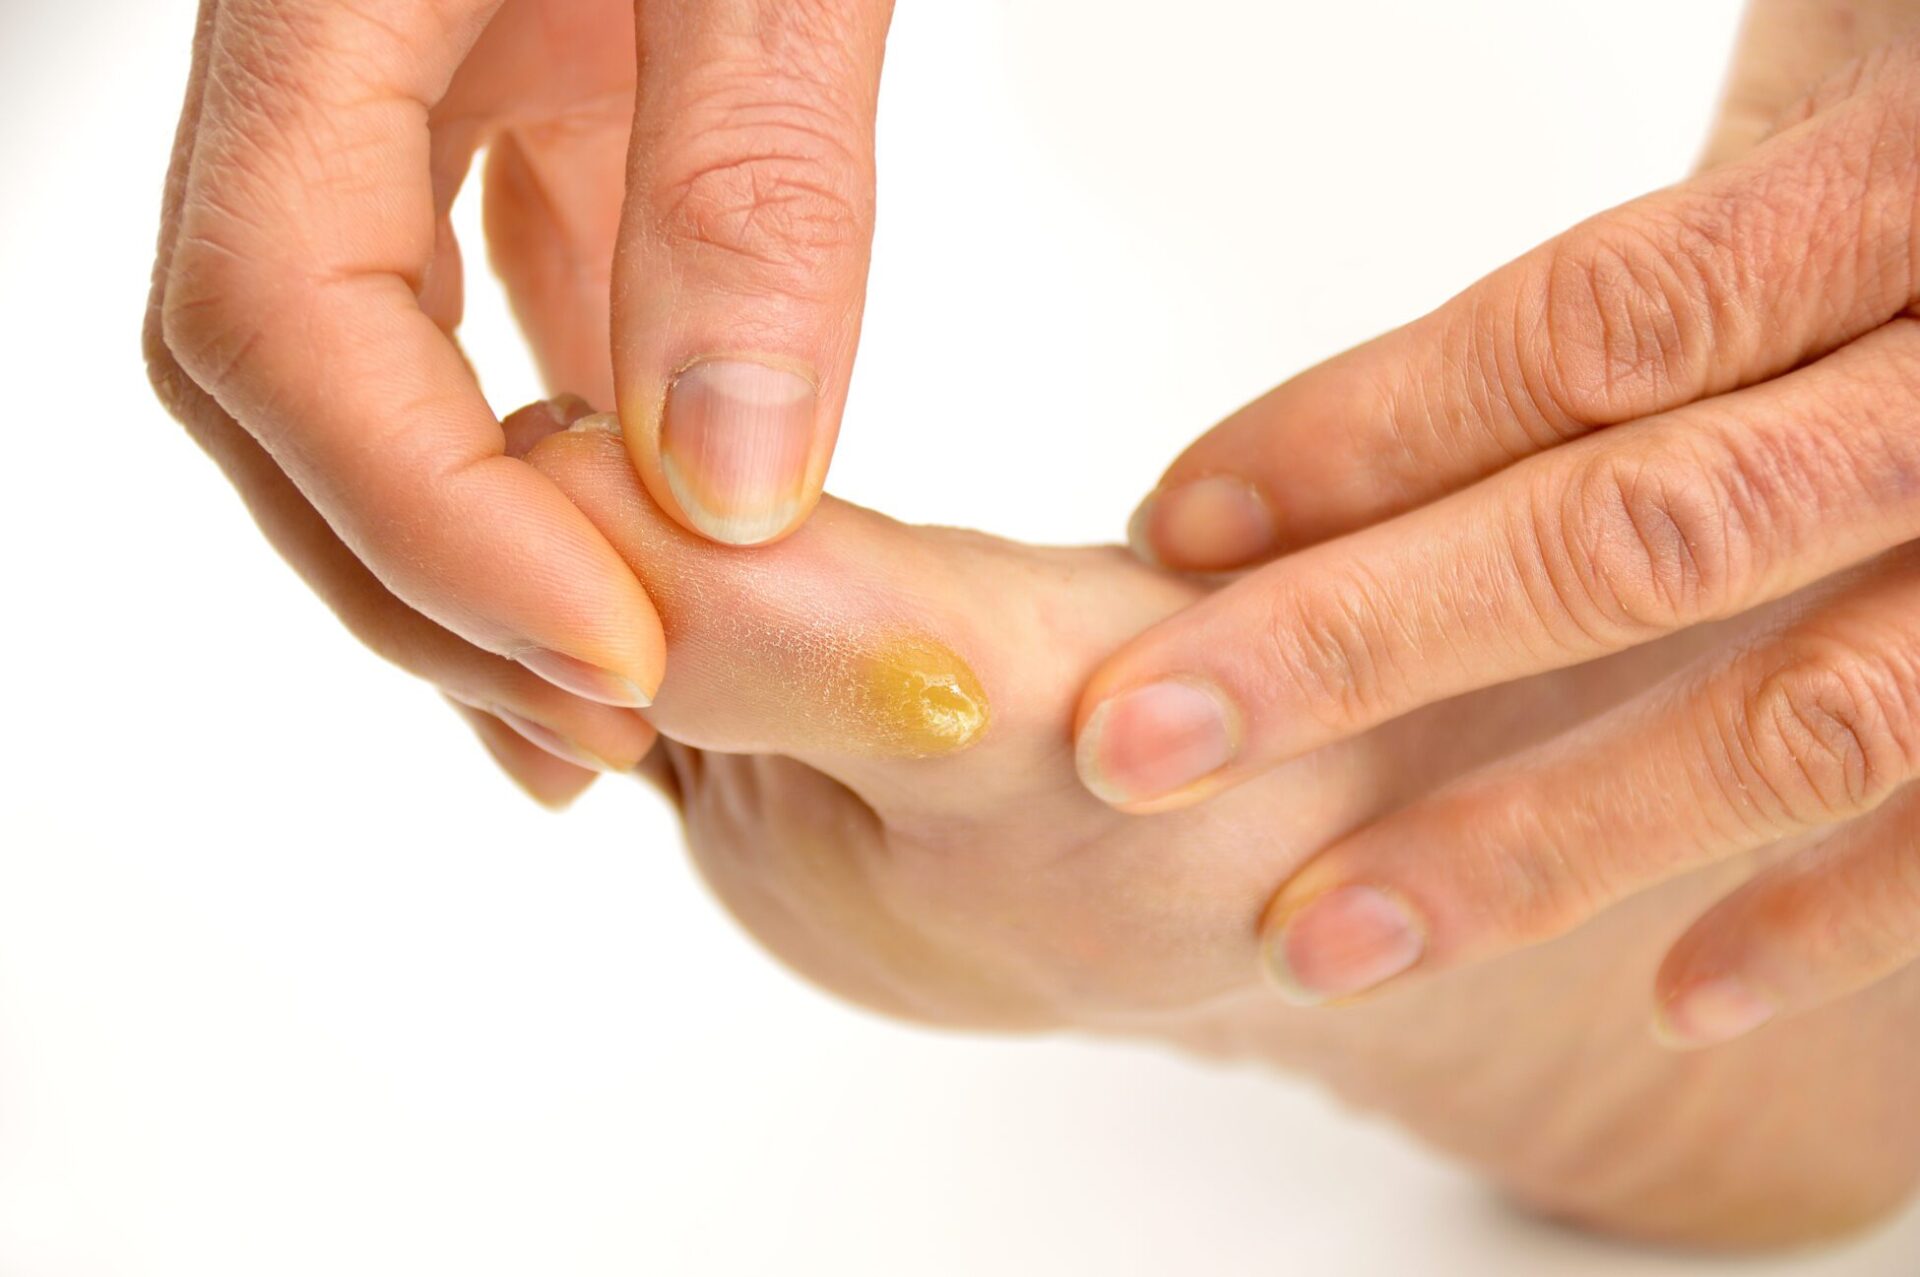 How to Get Rid of Calluses - 7 Tips to Remove a Callus Safely